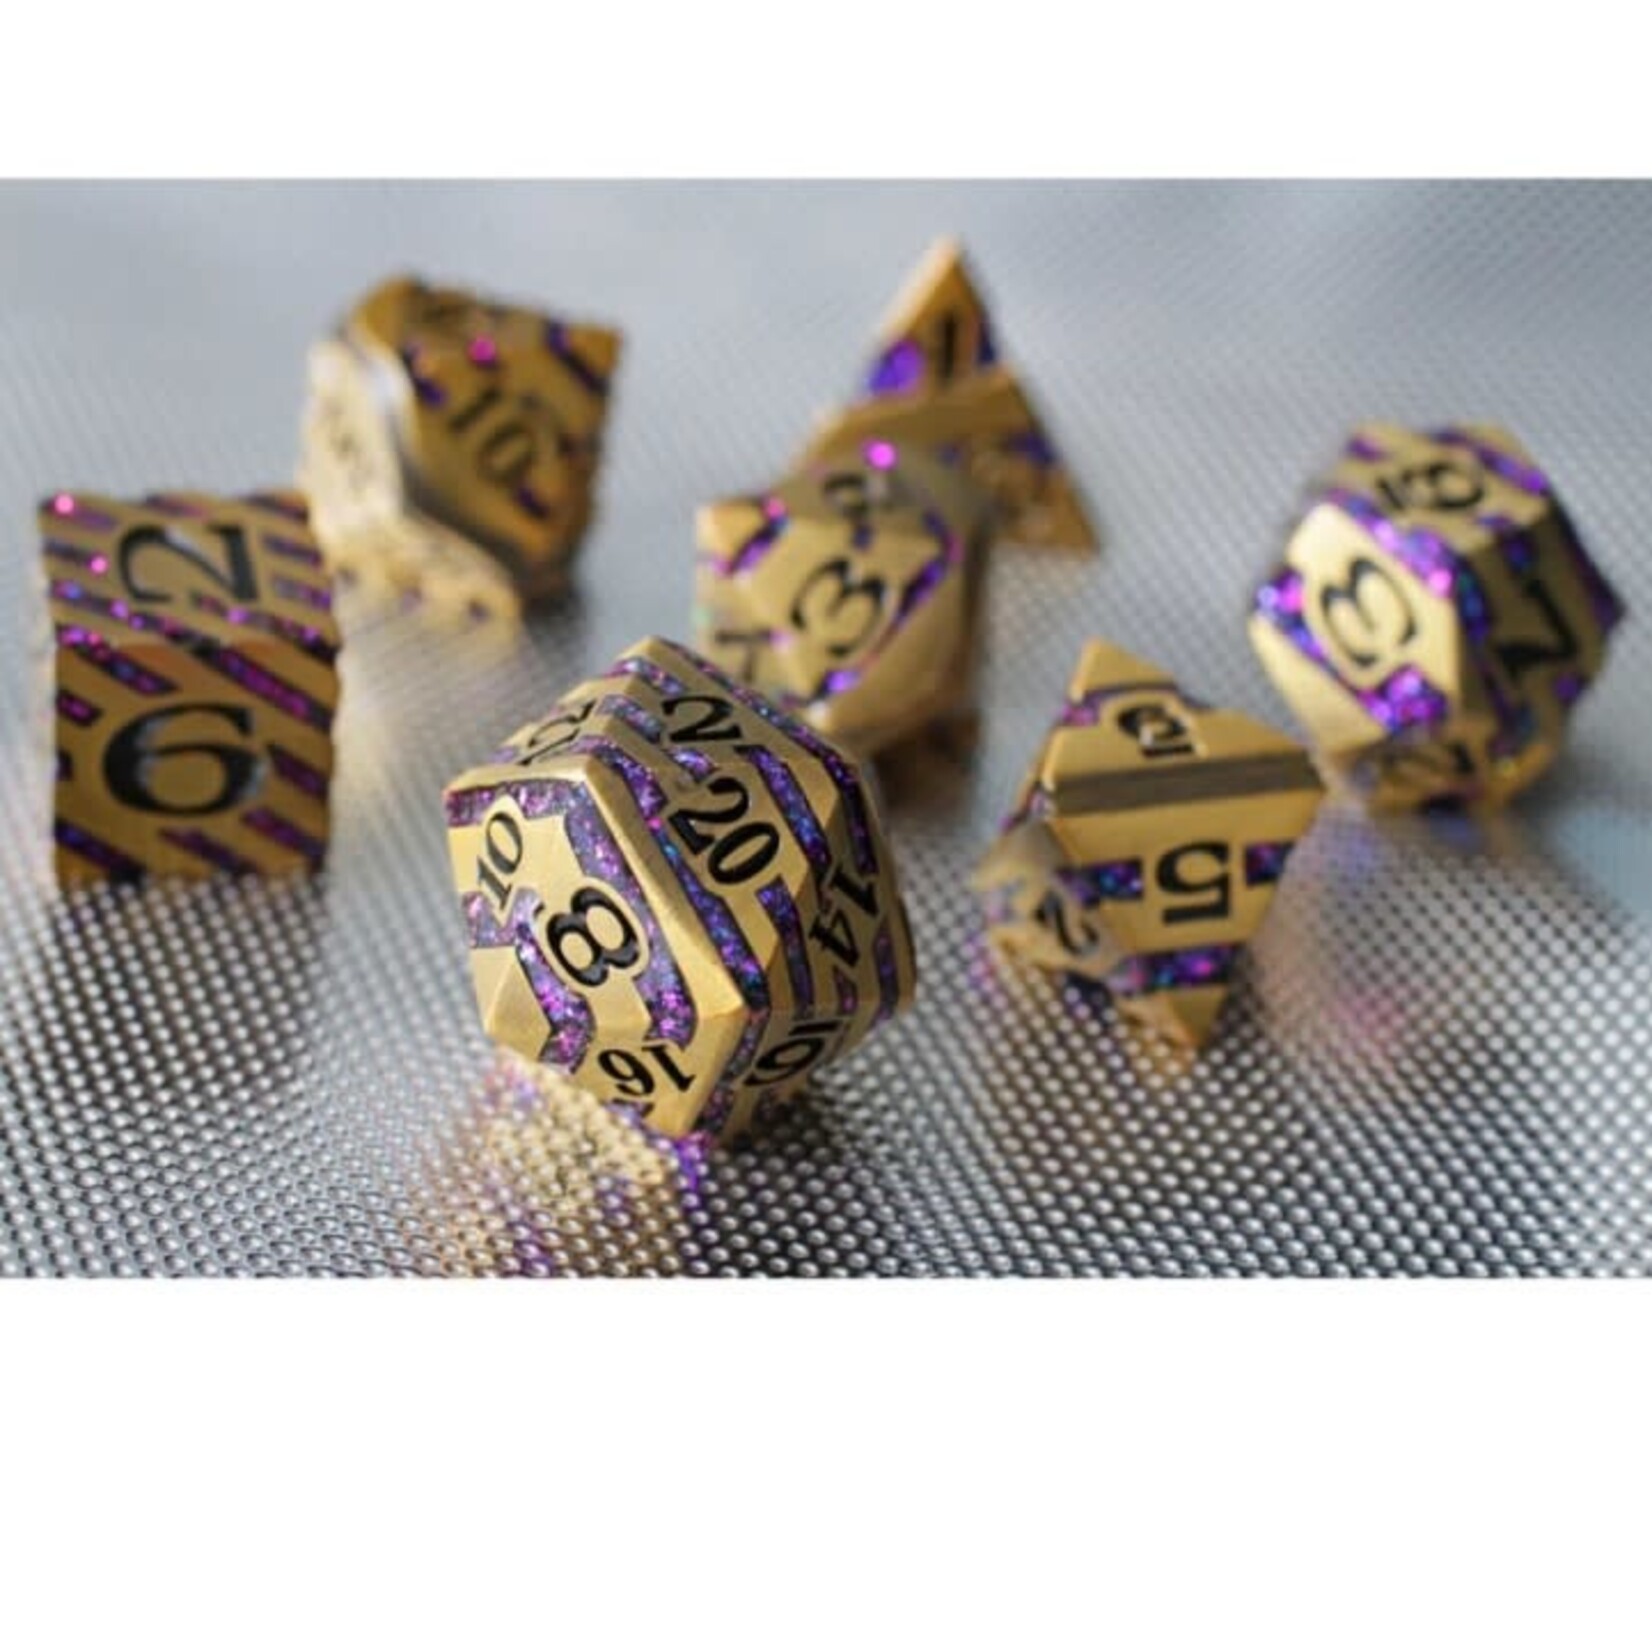 Forged Gaming Set of 7 Metal Dice: Gnomish Riches